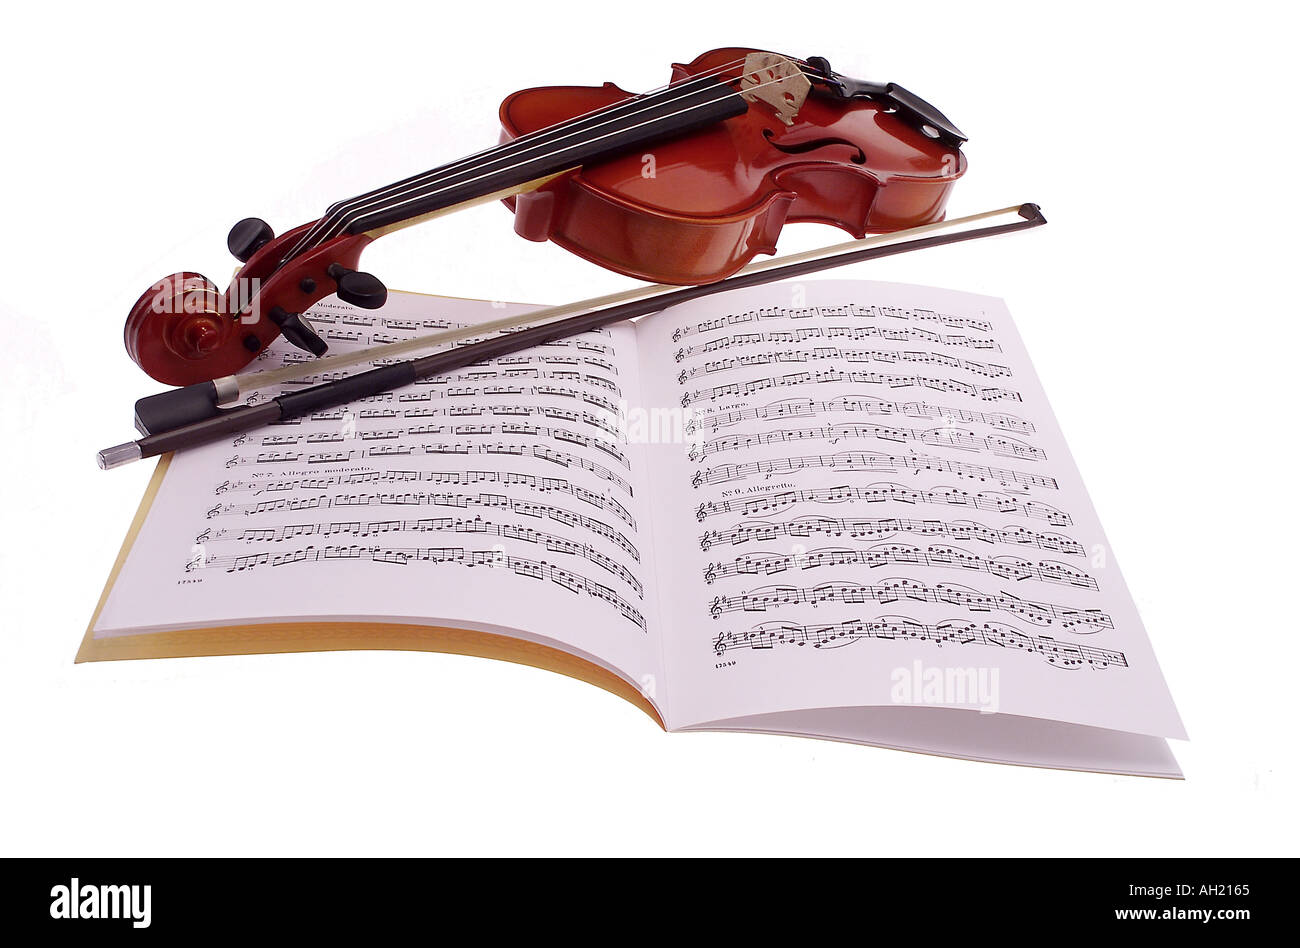 Viola with sheet music Stock Photo